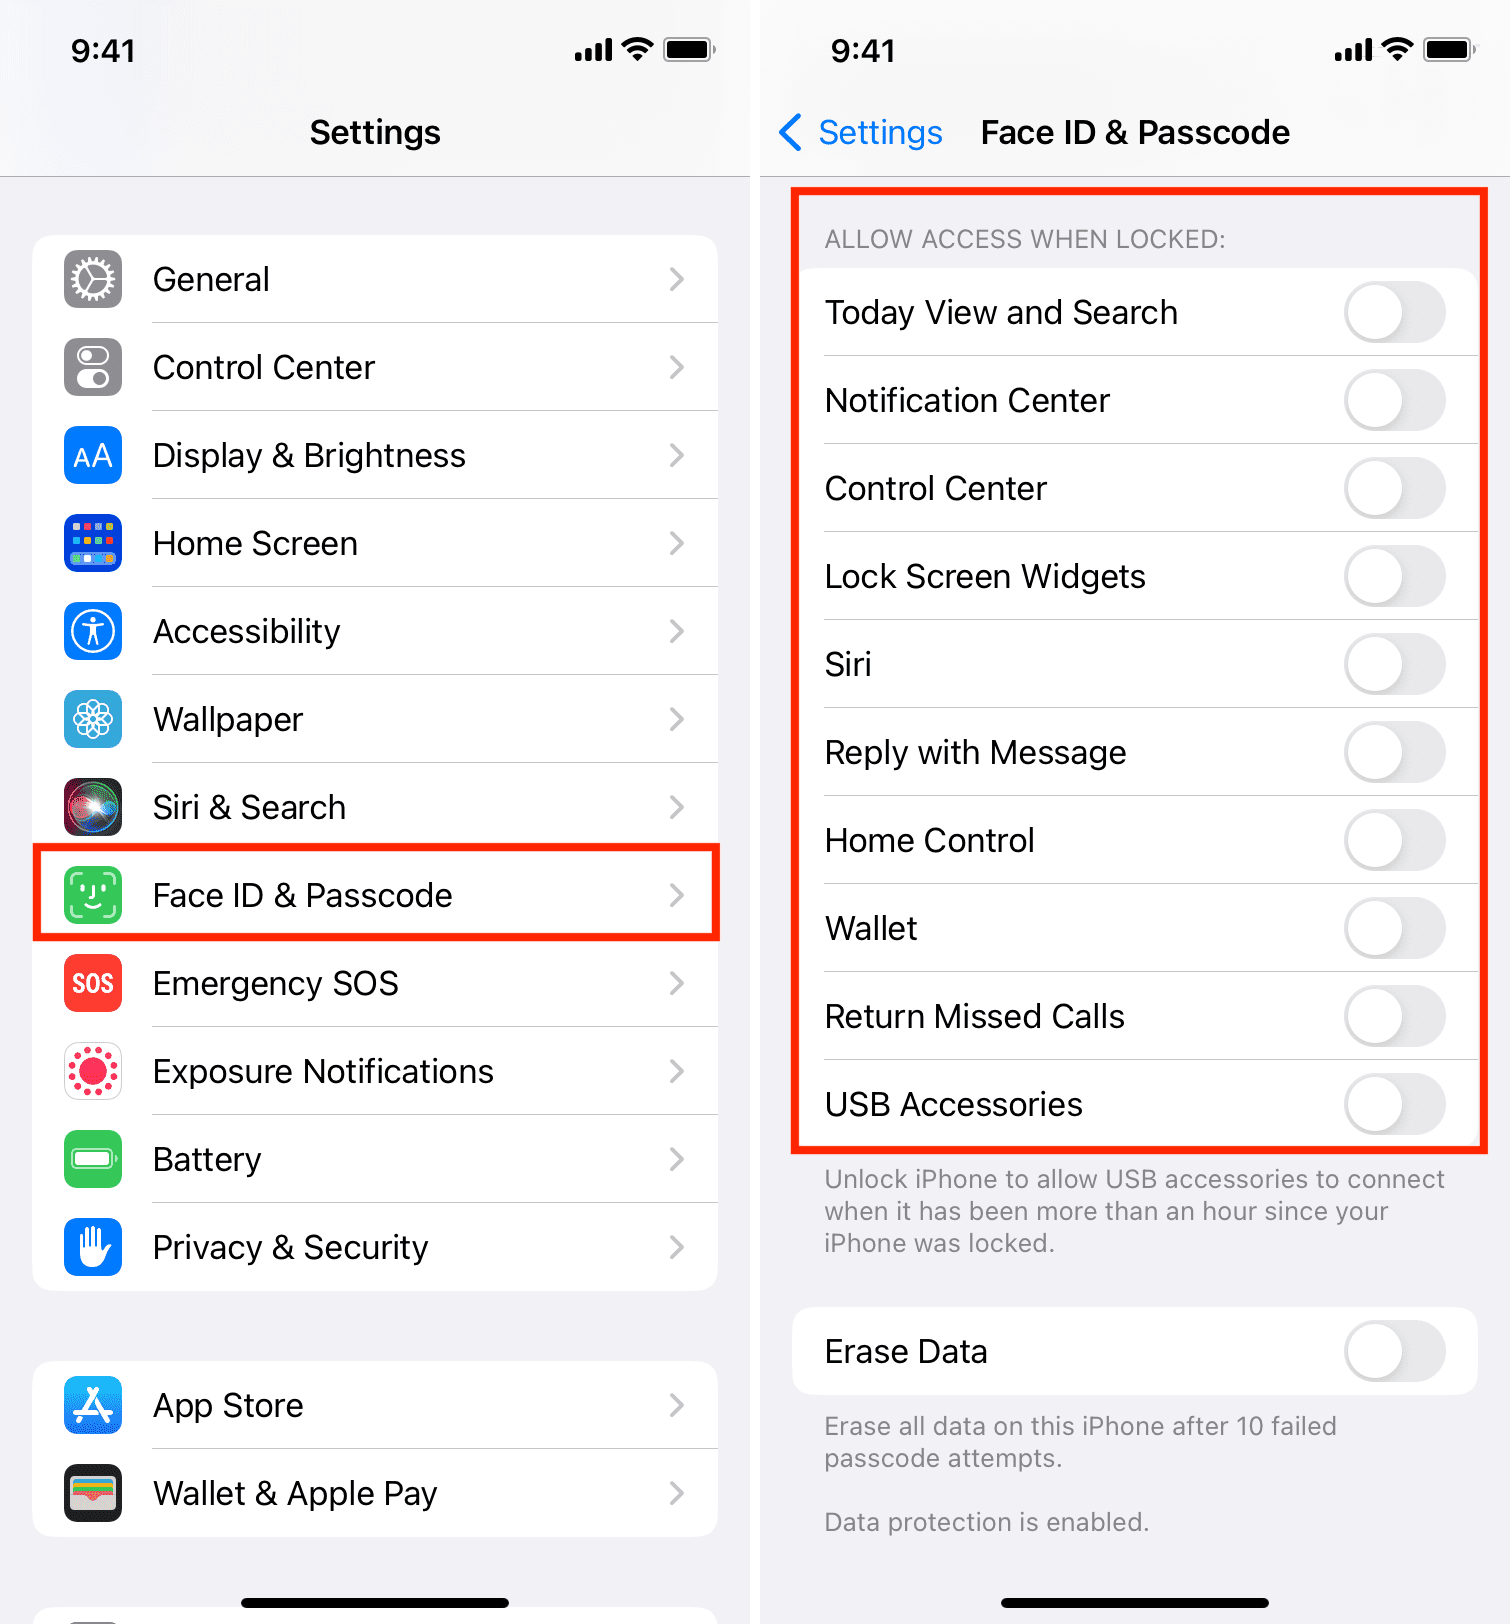 Allow access when locked settings on iPhone